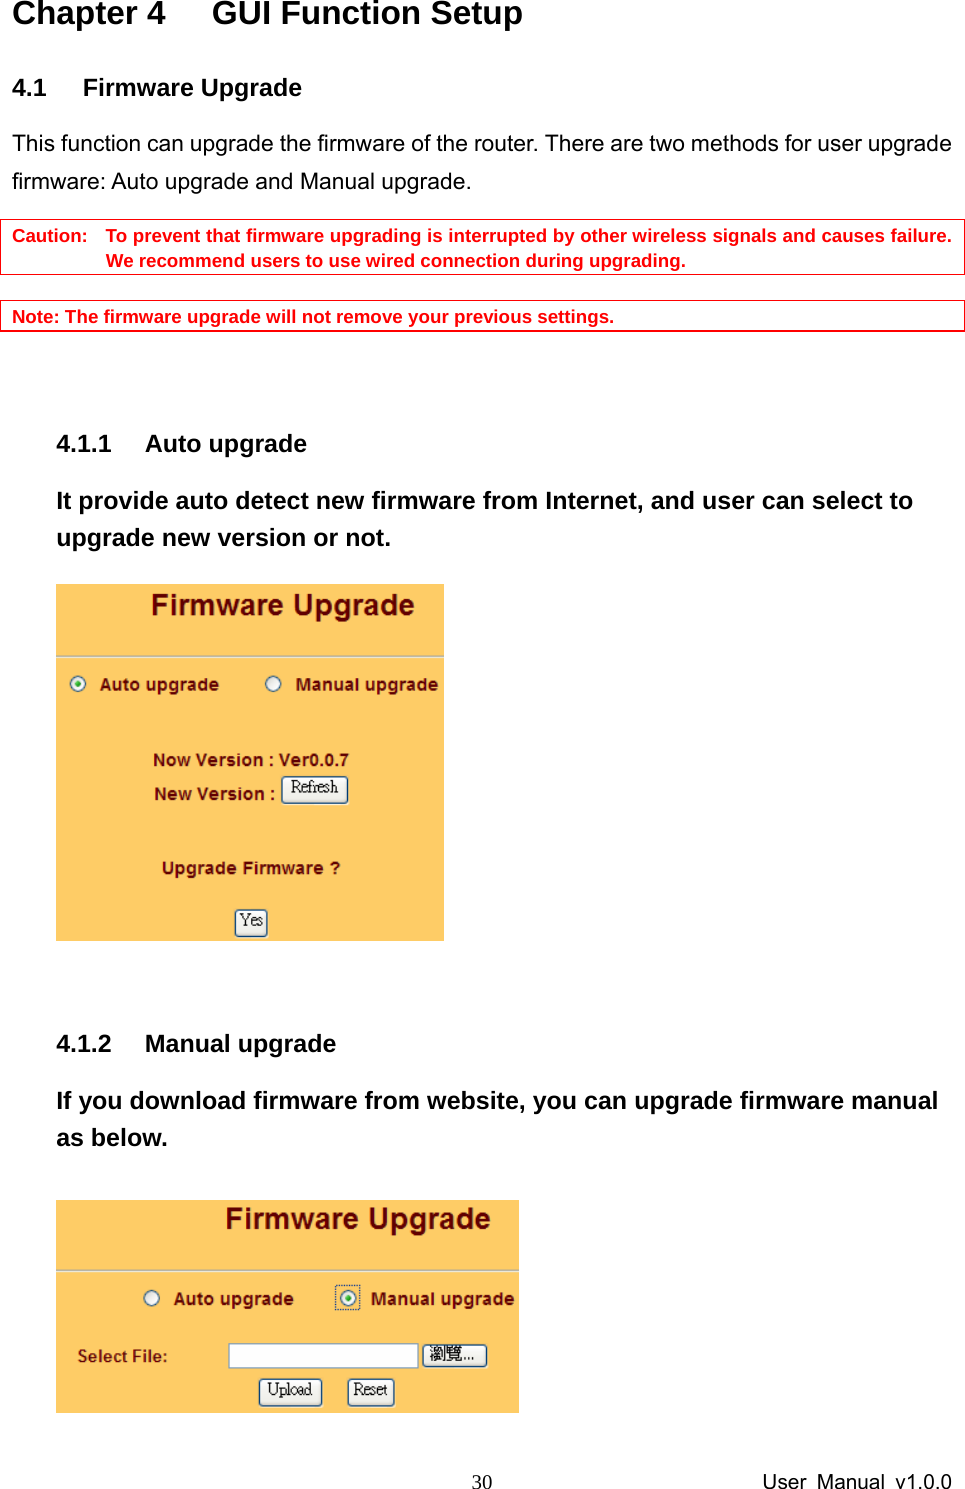                 User Manual v1.0.0 30Chapter 4  GUI Function Setup 4.1 Firmware Upgrade This function can upgrade the firmware of the router. There are two methods for user upgrade firmware: Auto upgrade and Manual upgrade. Caution:   To prevent that firmware upgrading is interrupted by other wireless signals and causes failure. We recommend users to use wired connection during upgrading.  Note: The firmware upgrade will not remove your previous settings.  4.1.1 Auto upgrade It provide auto detect new firmware from Internet, and user can select to upgrade new version or not.     4.1.2 Manual upgrade If you download firmware from website, you can upgrade firmware manual as below.  